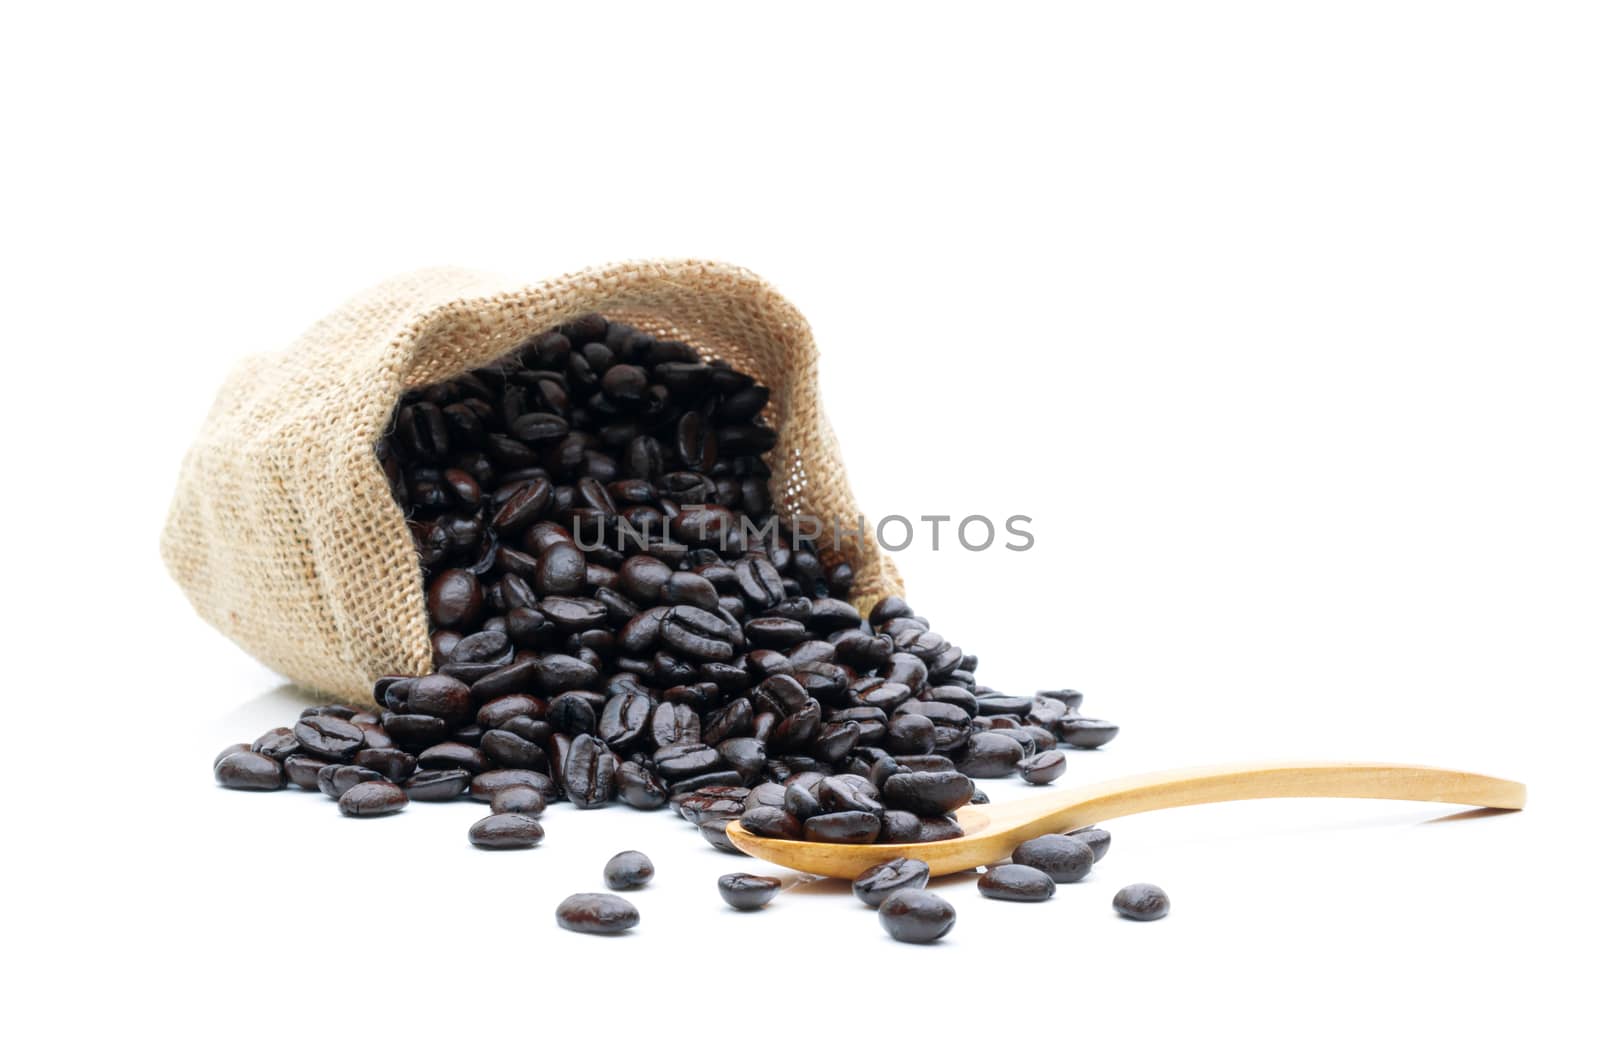 Roasted coffee beans in a sack of cloth on a white background